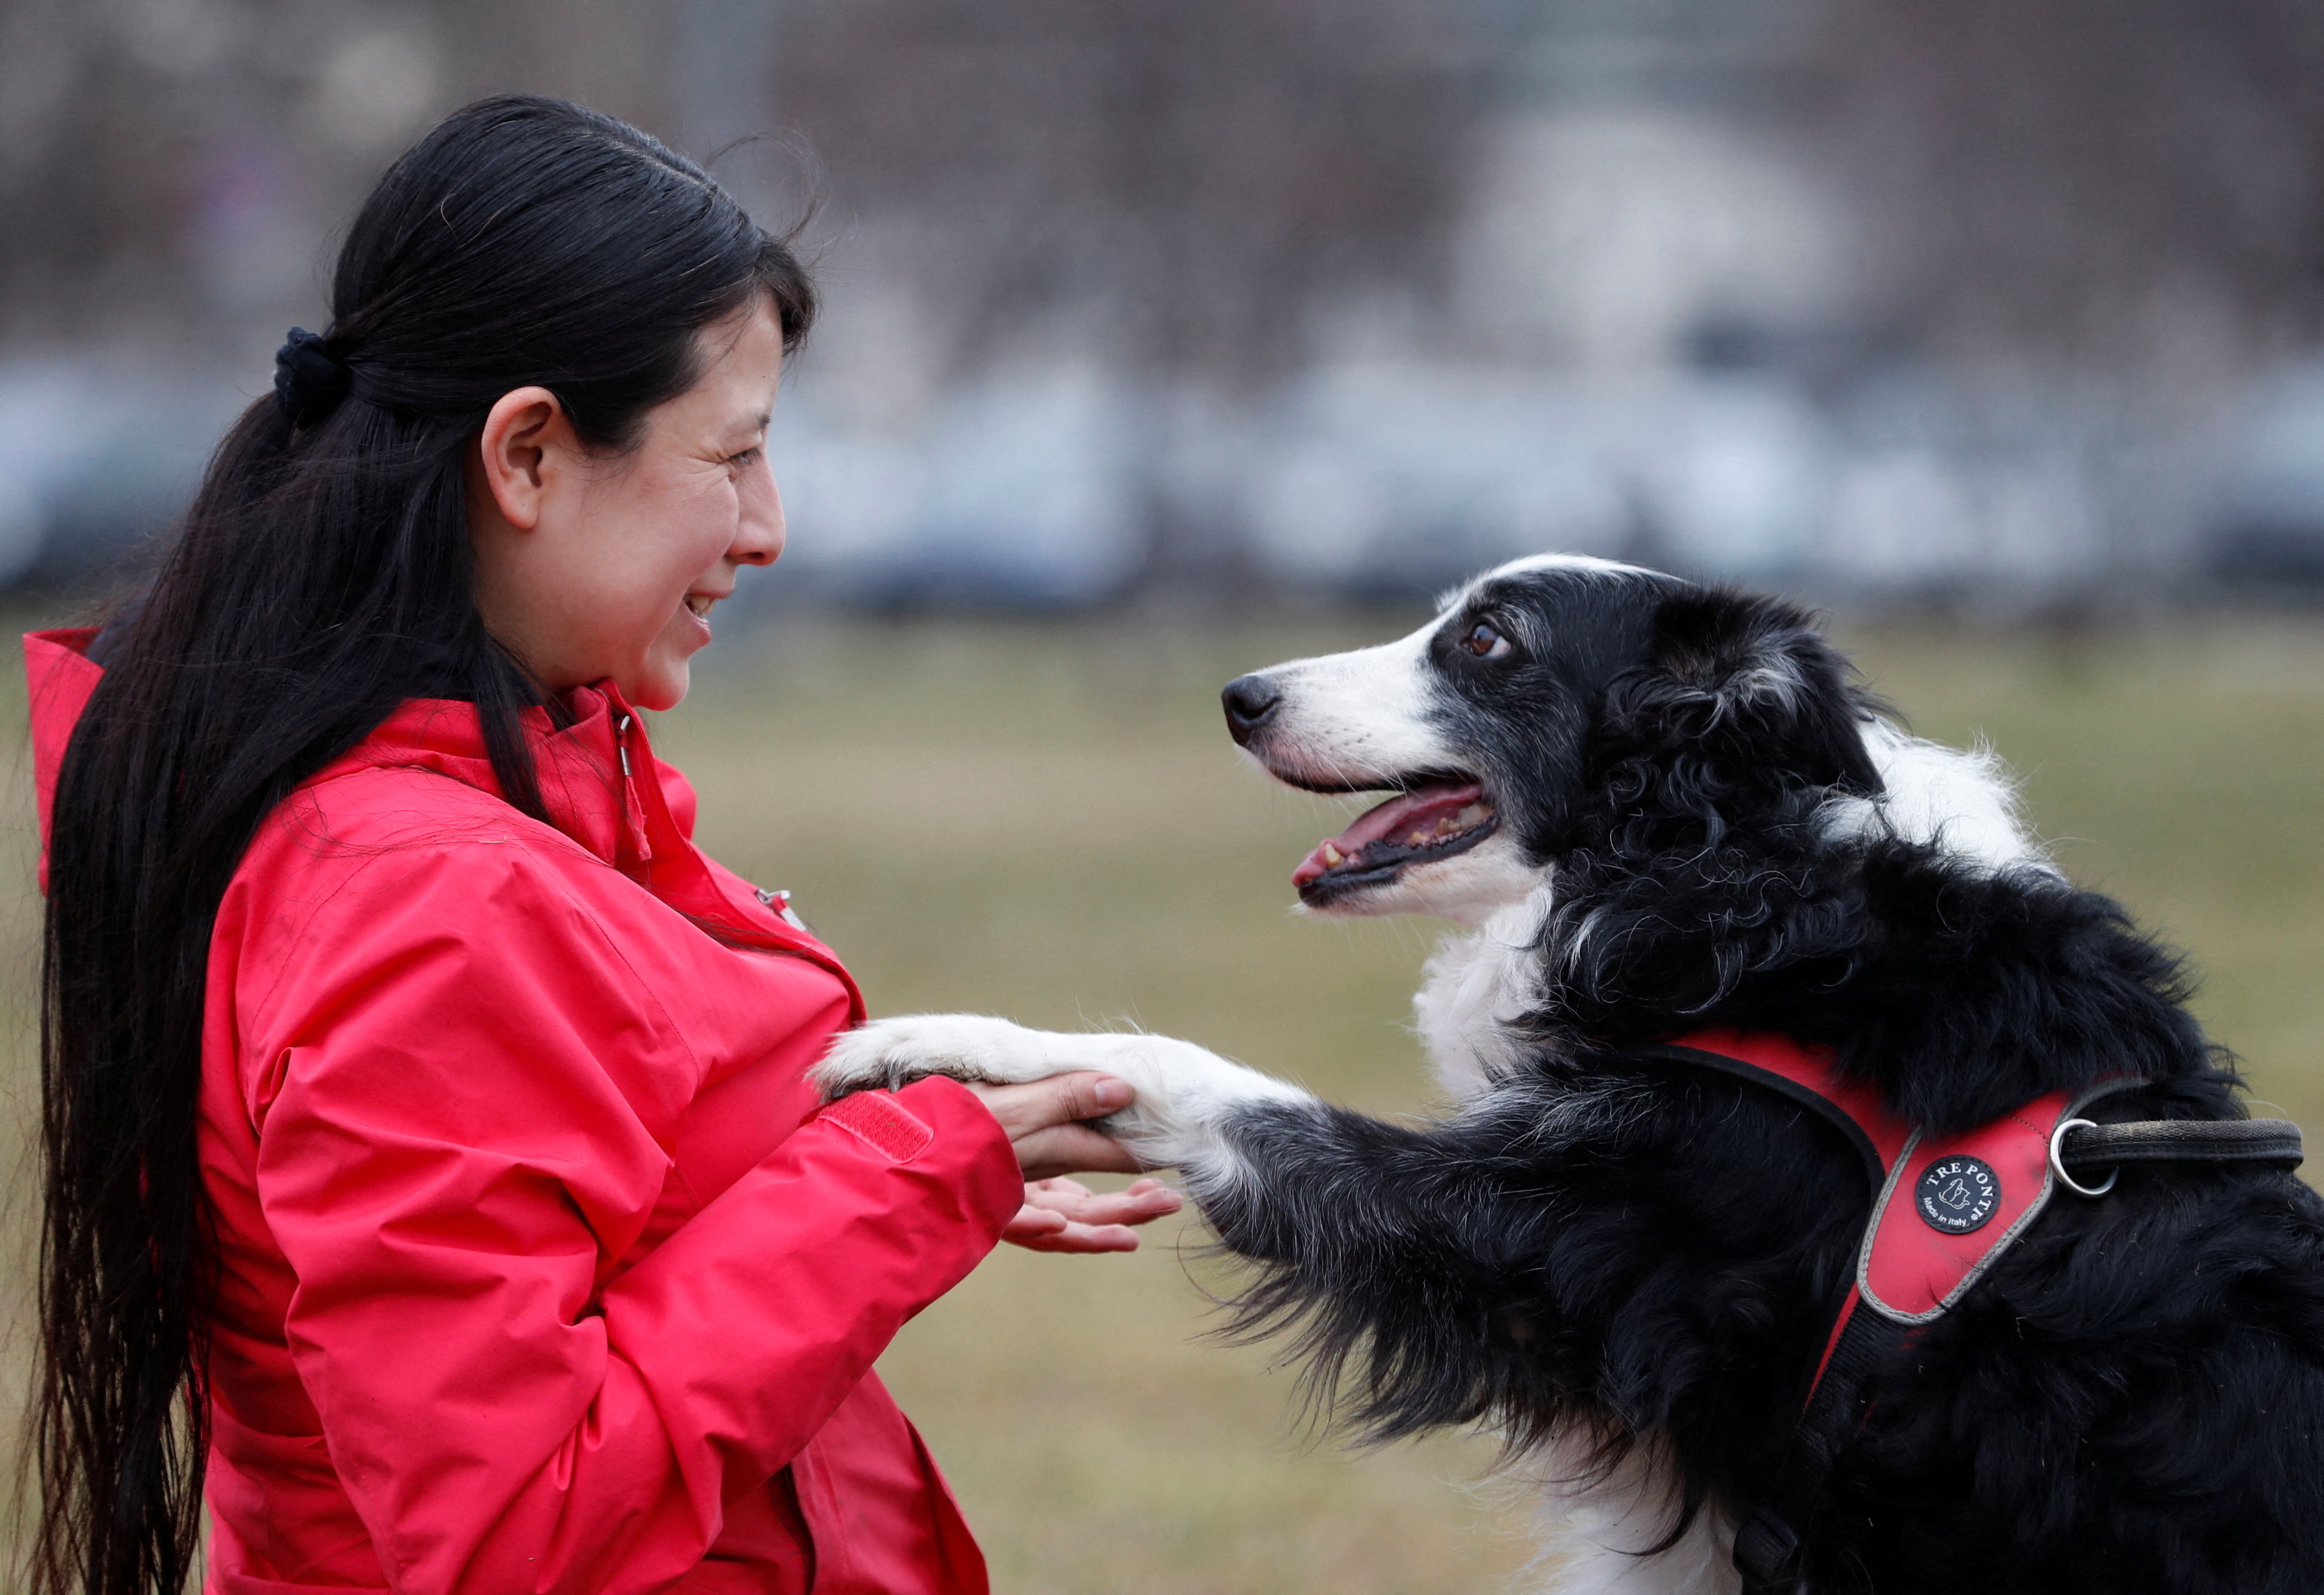 Postdoctoral researcher Laura V. Cuaya talks to her dog Kun-kun, an 8-year-old Border Collie, at the Ethology Department of the Eotvos Lorand University in Budapest, Hungary, January 5, 2022. REUTERS/Bernadett Szabo